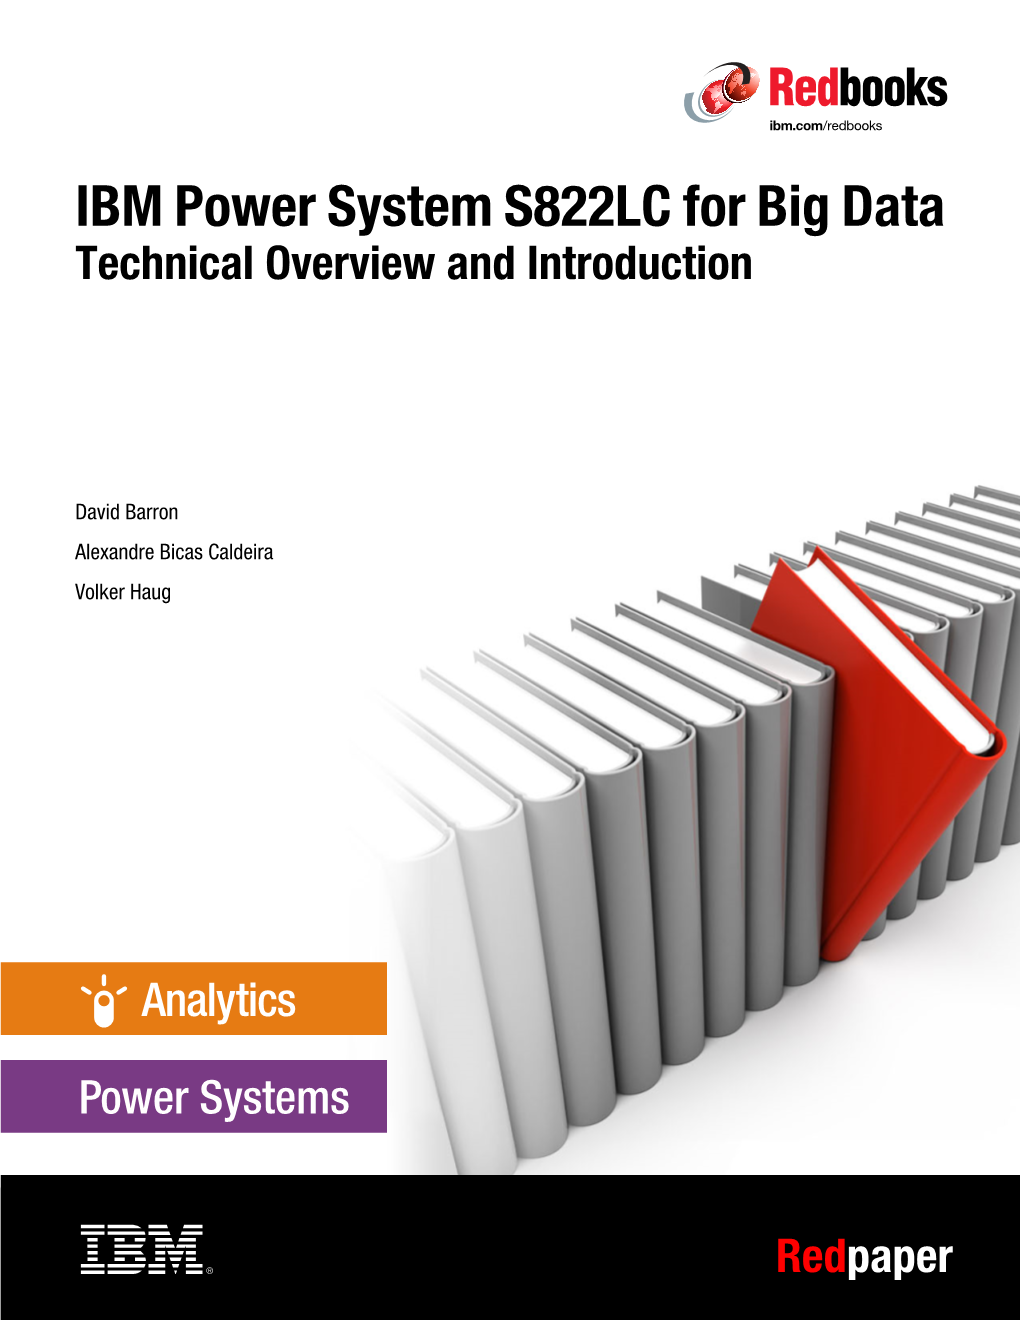 IBM Power System S822LC for Big Data Technical Overview and Introduction